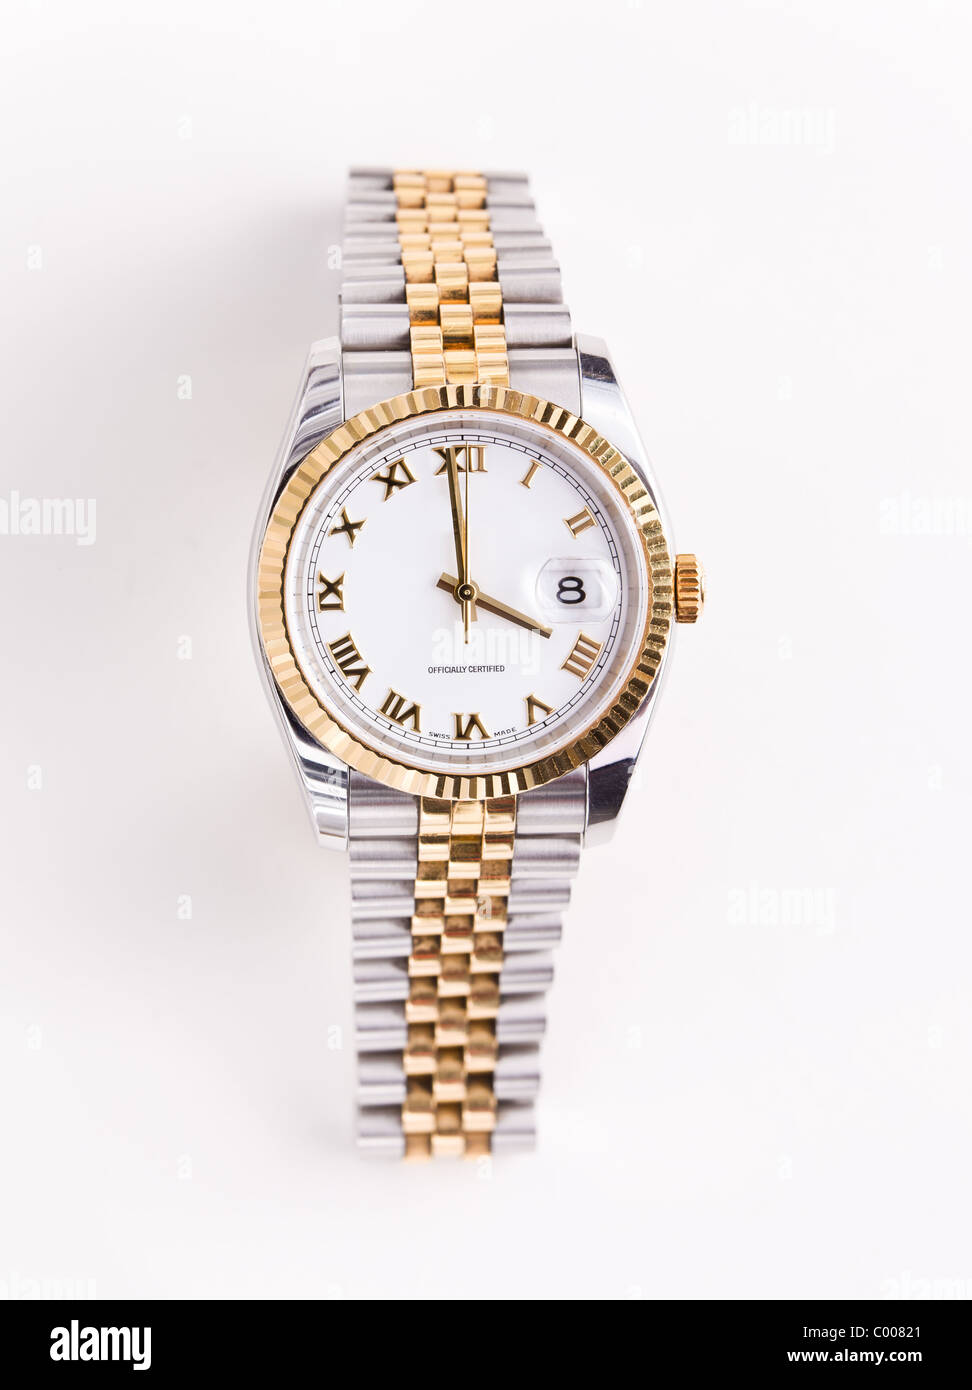 Expensive gold bevelled watch with white face and gold hands and numerals against white background Stock Photo